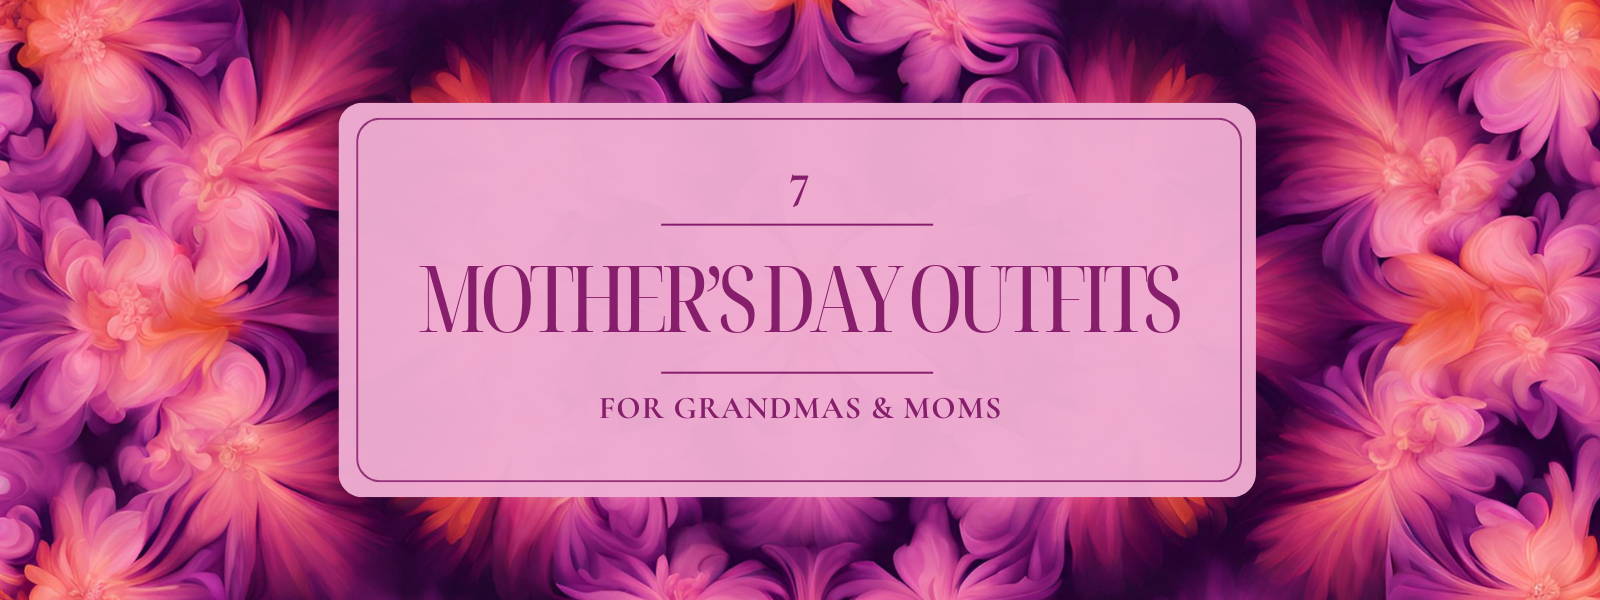 7 Mother's Day Outfits for Grandmas and Moms